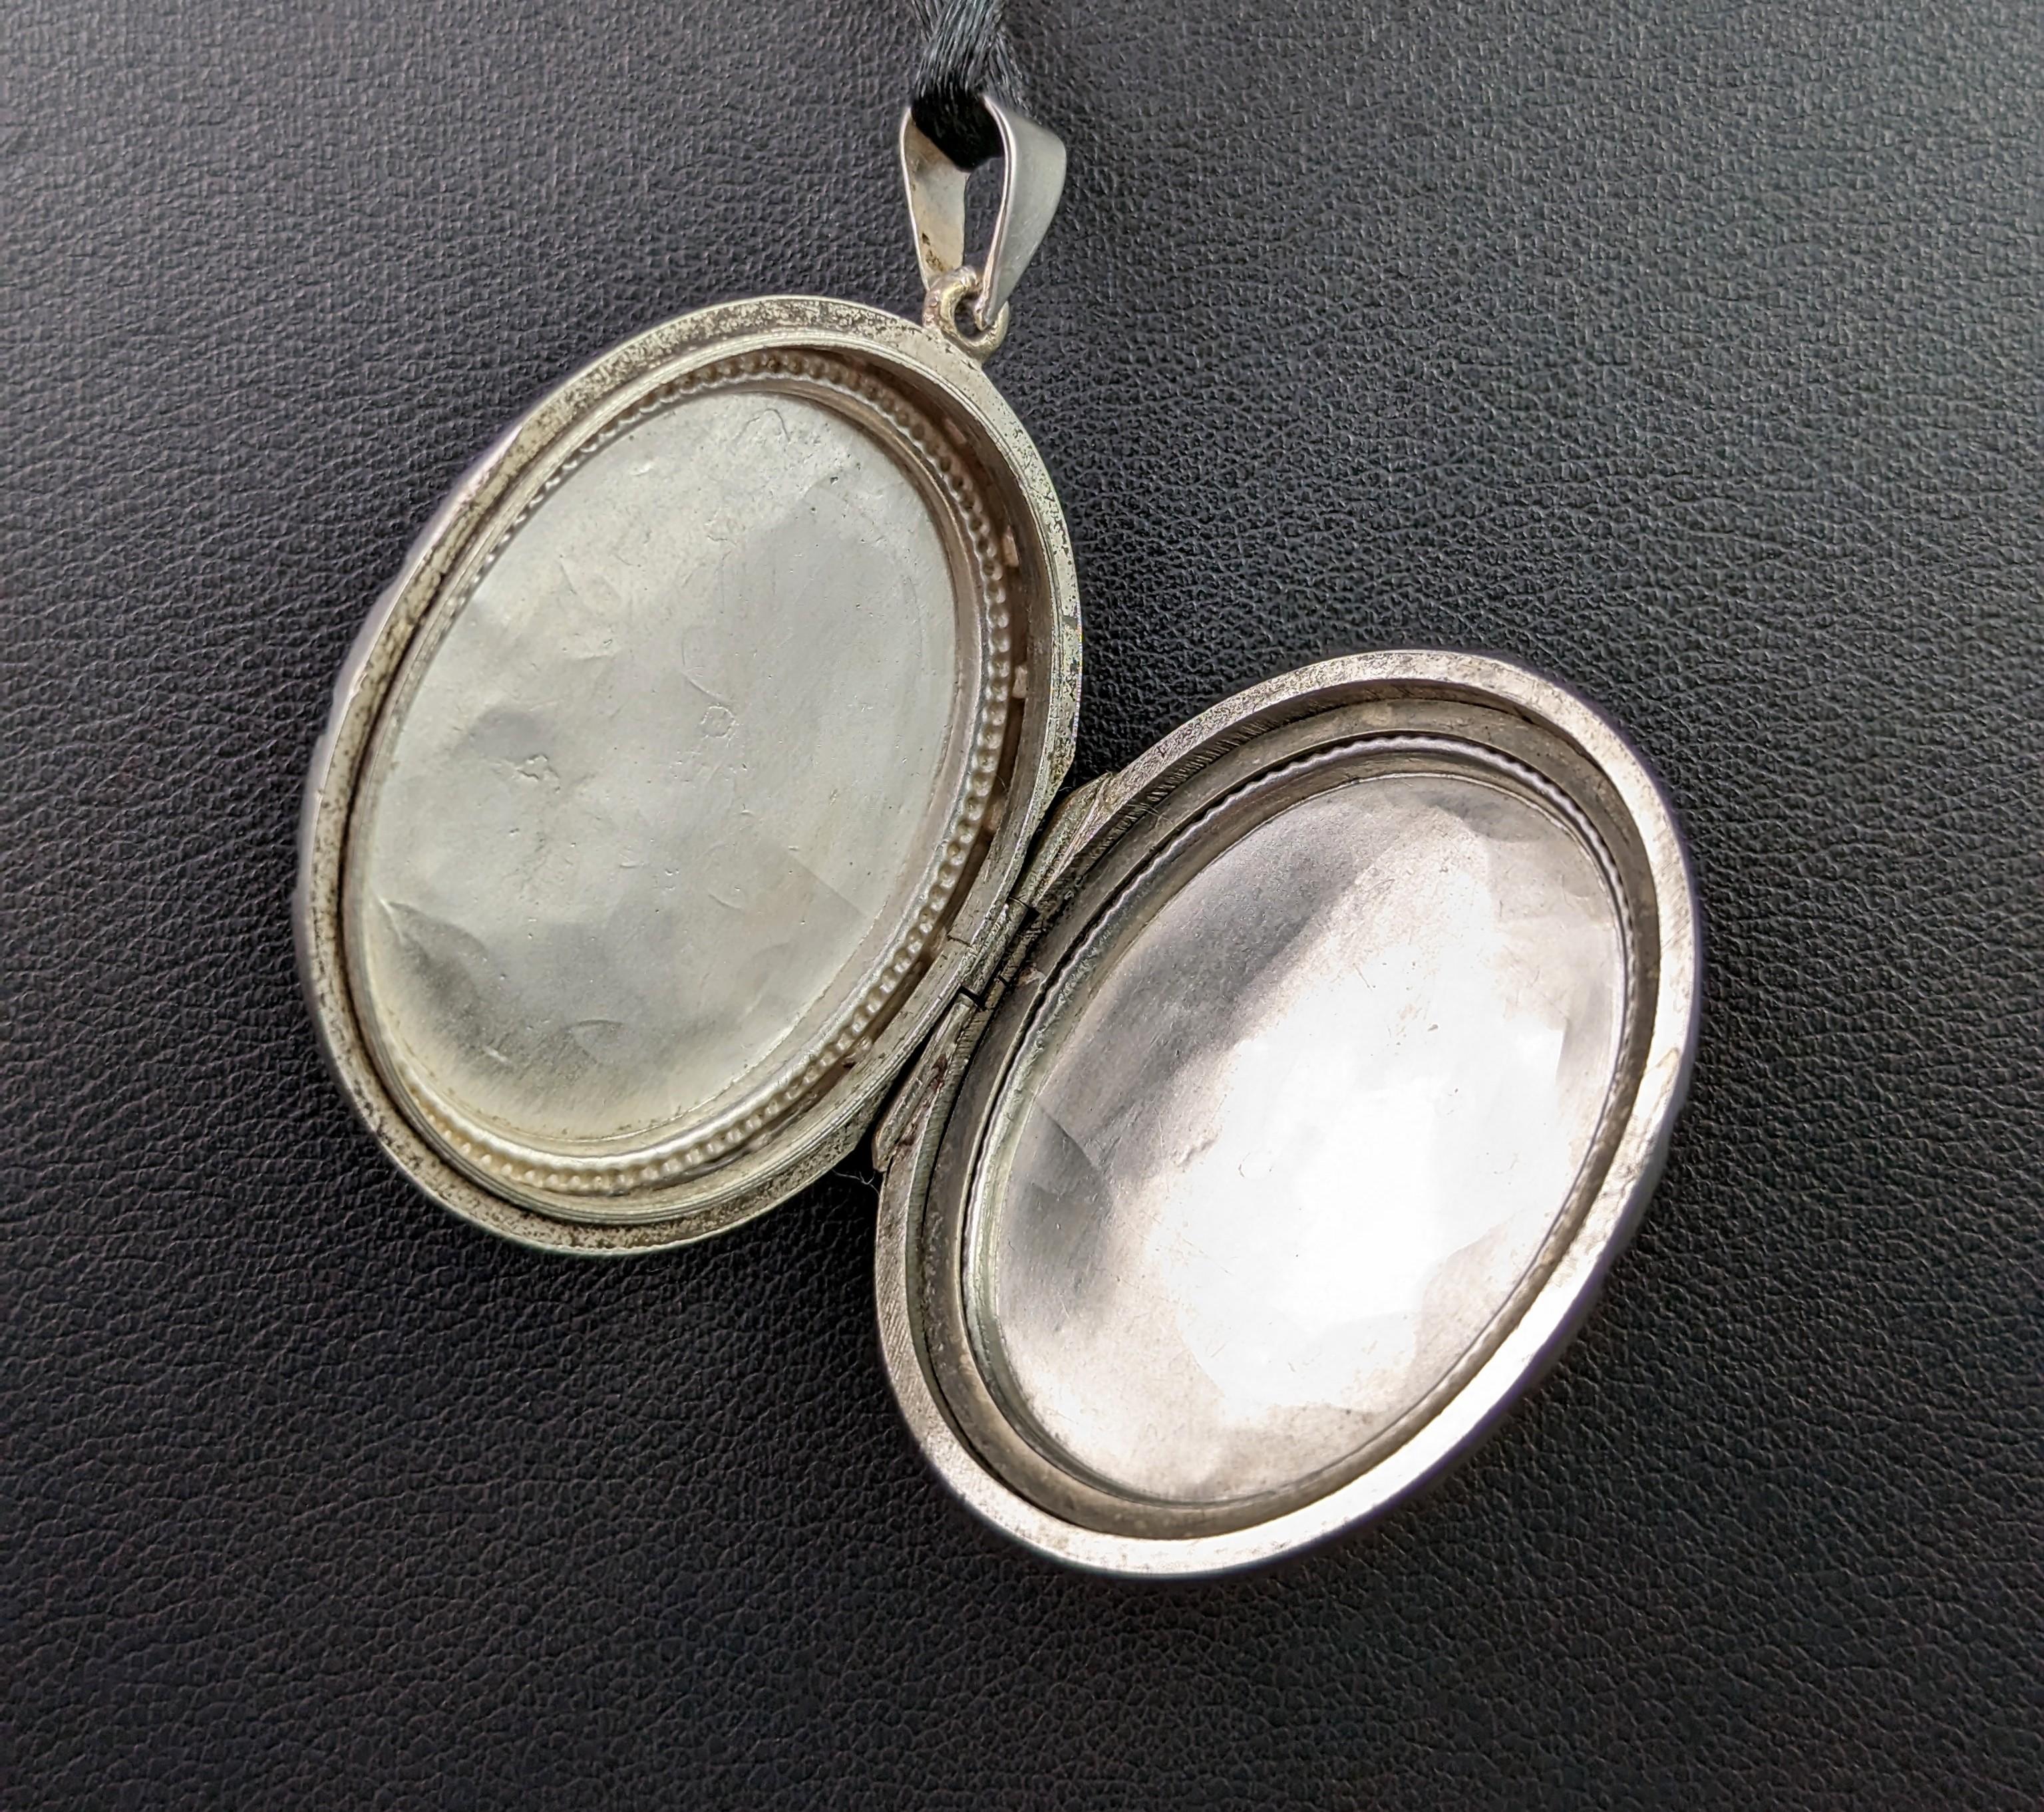 Women's Victorian Aesthetic Era Locket, Sterling Silver and 9k Gold, Kingfisher